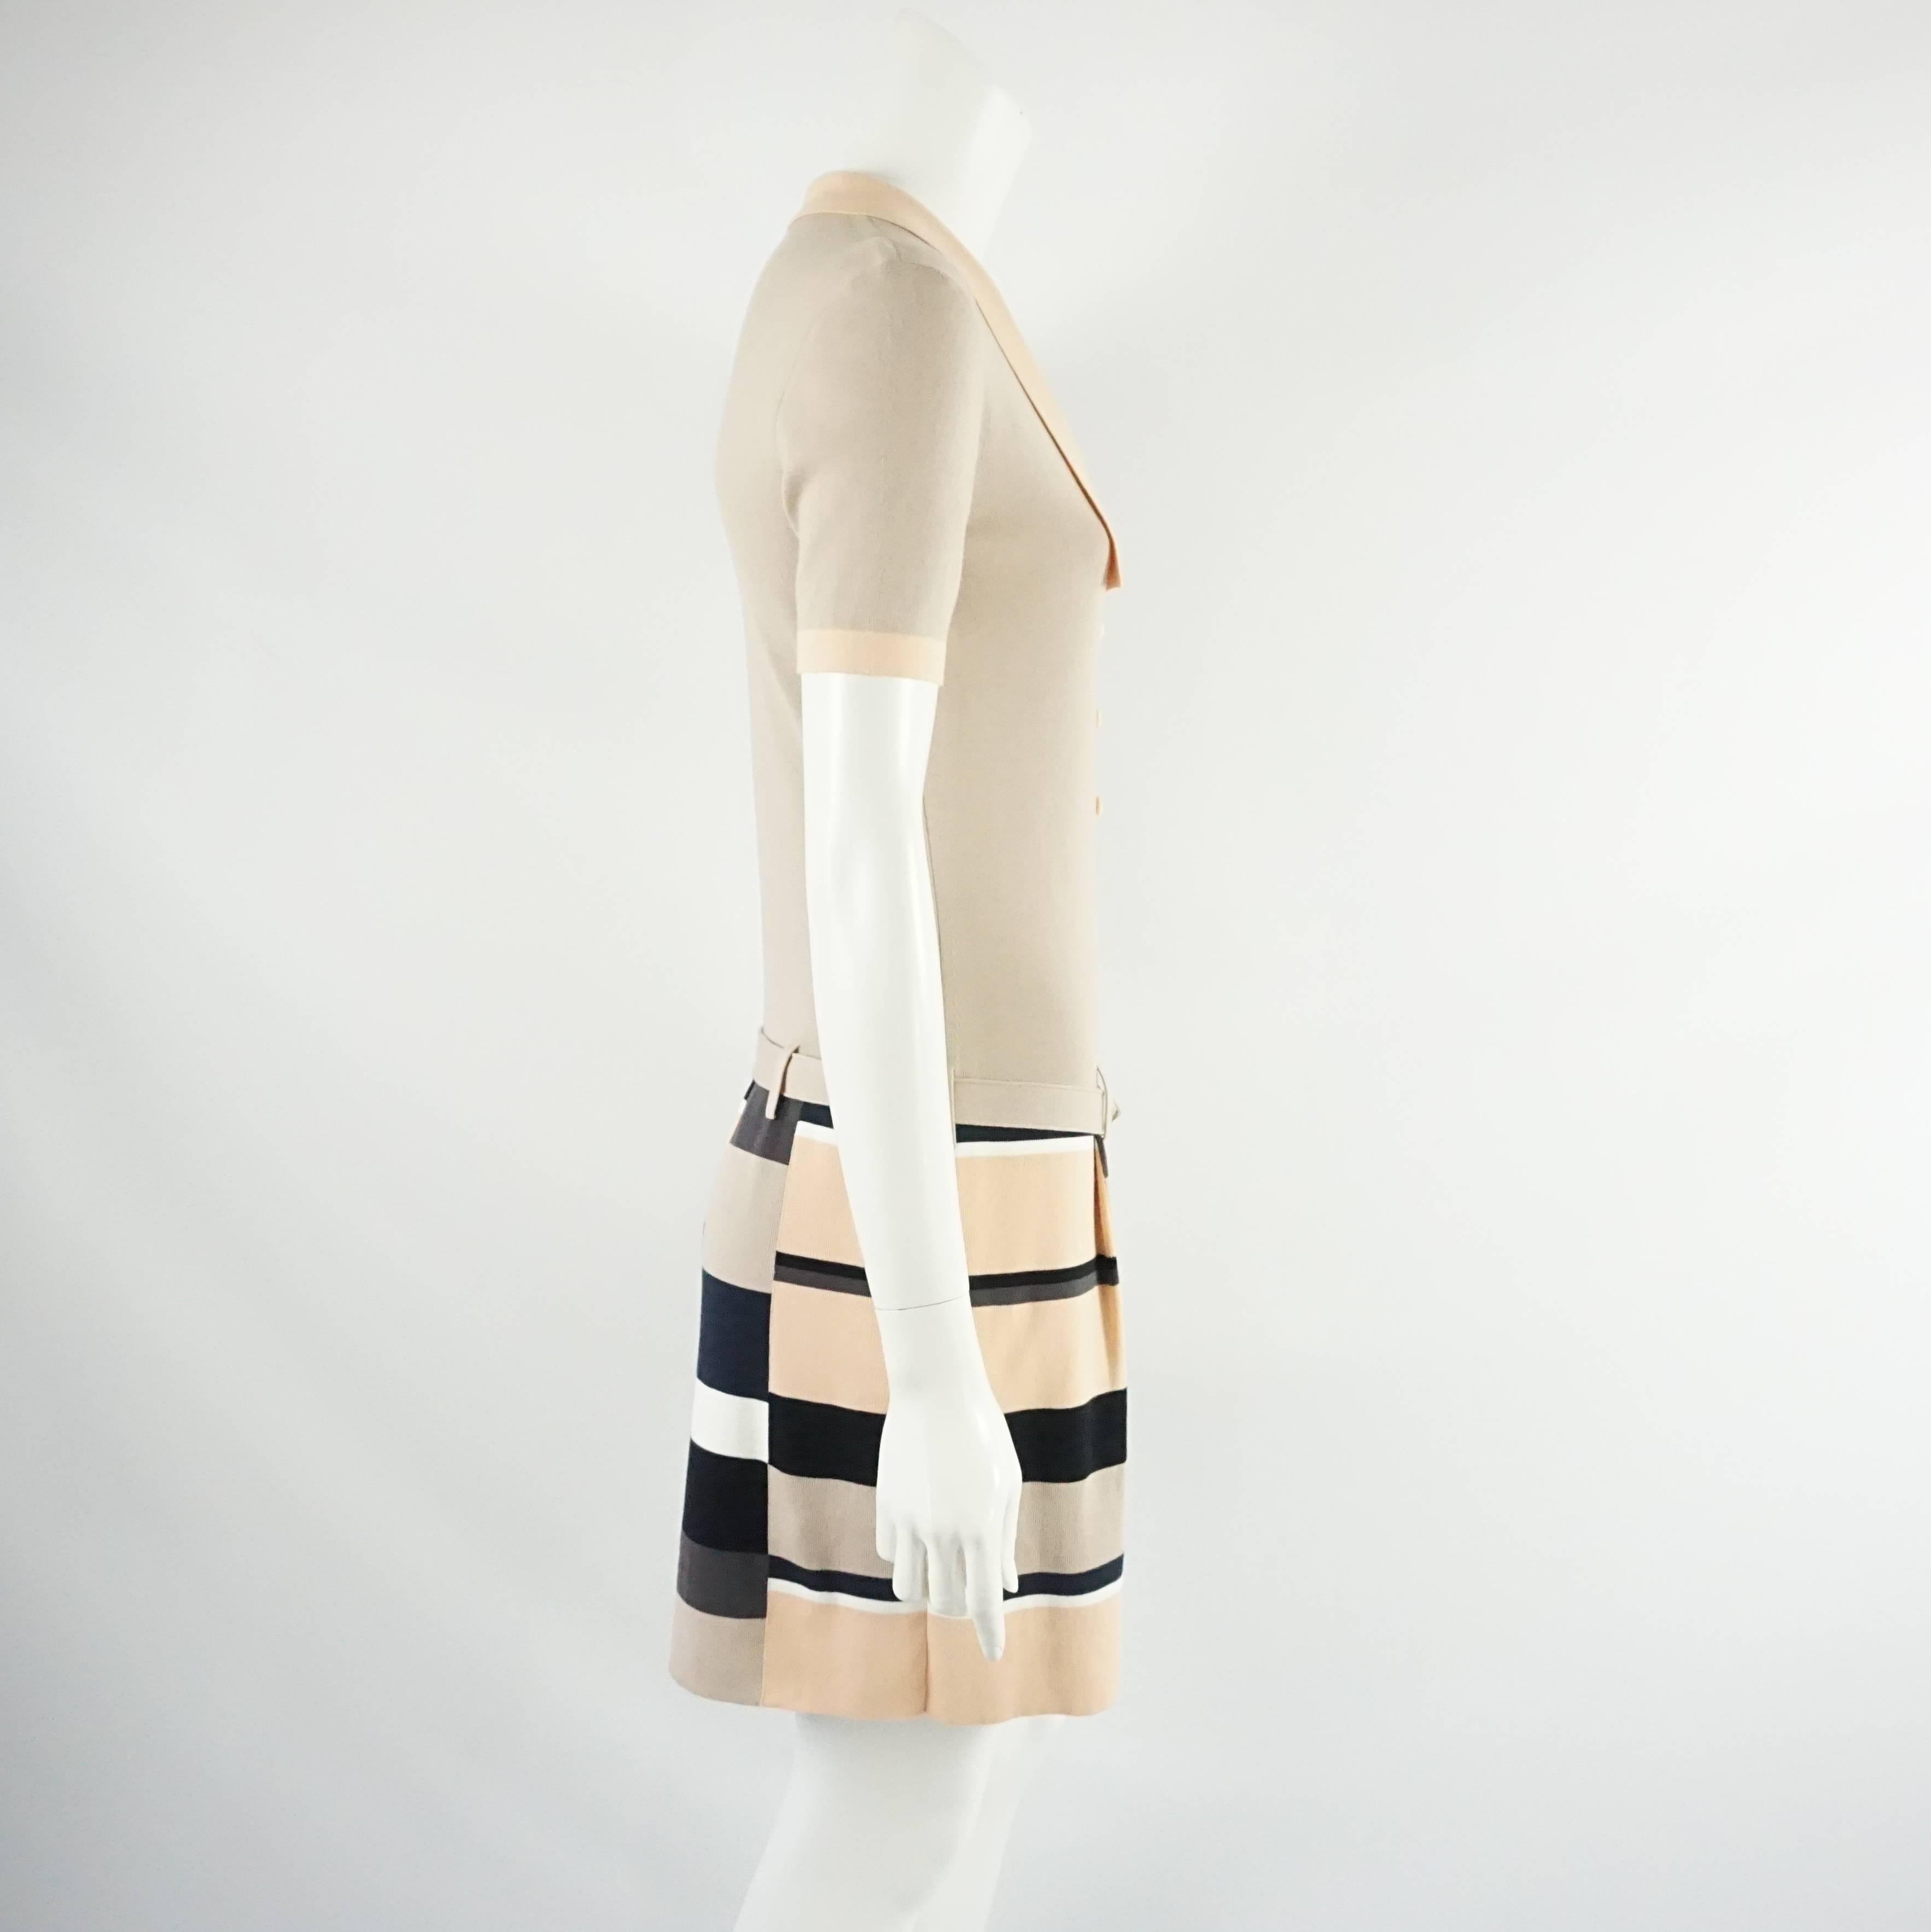 This Fendi cotton knit dress is light taupe with peach trim on the collar and neckline. The skirt has slight pleating and a taupe, peach, black, and brown checkered print. The dress also comes with a cotton belt that has the silver Fendi classic